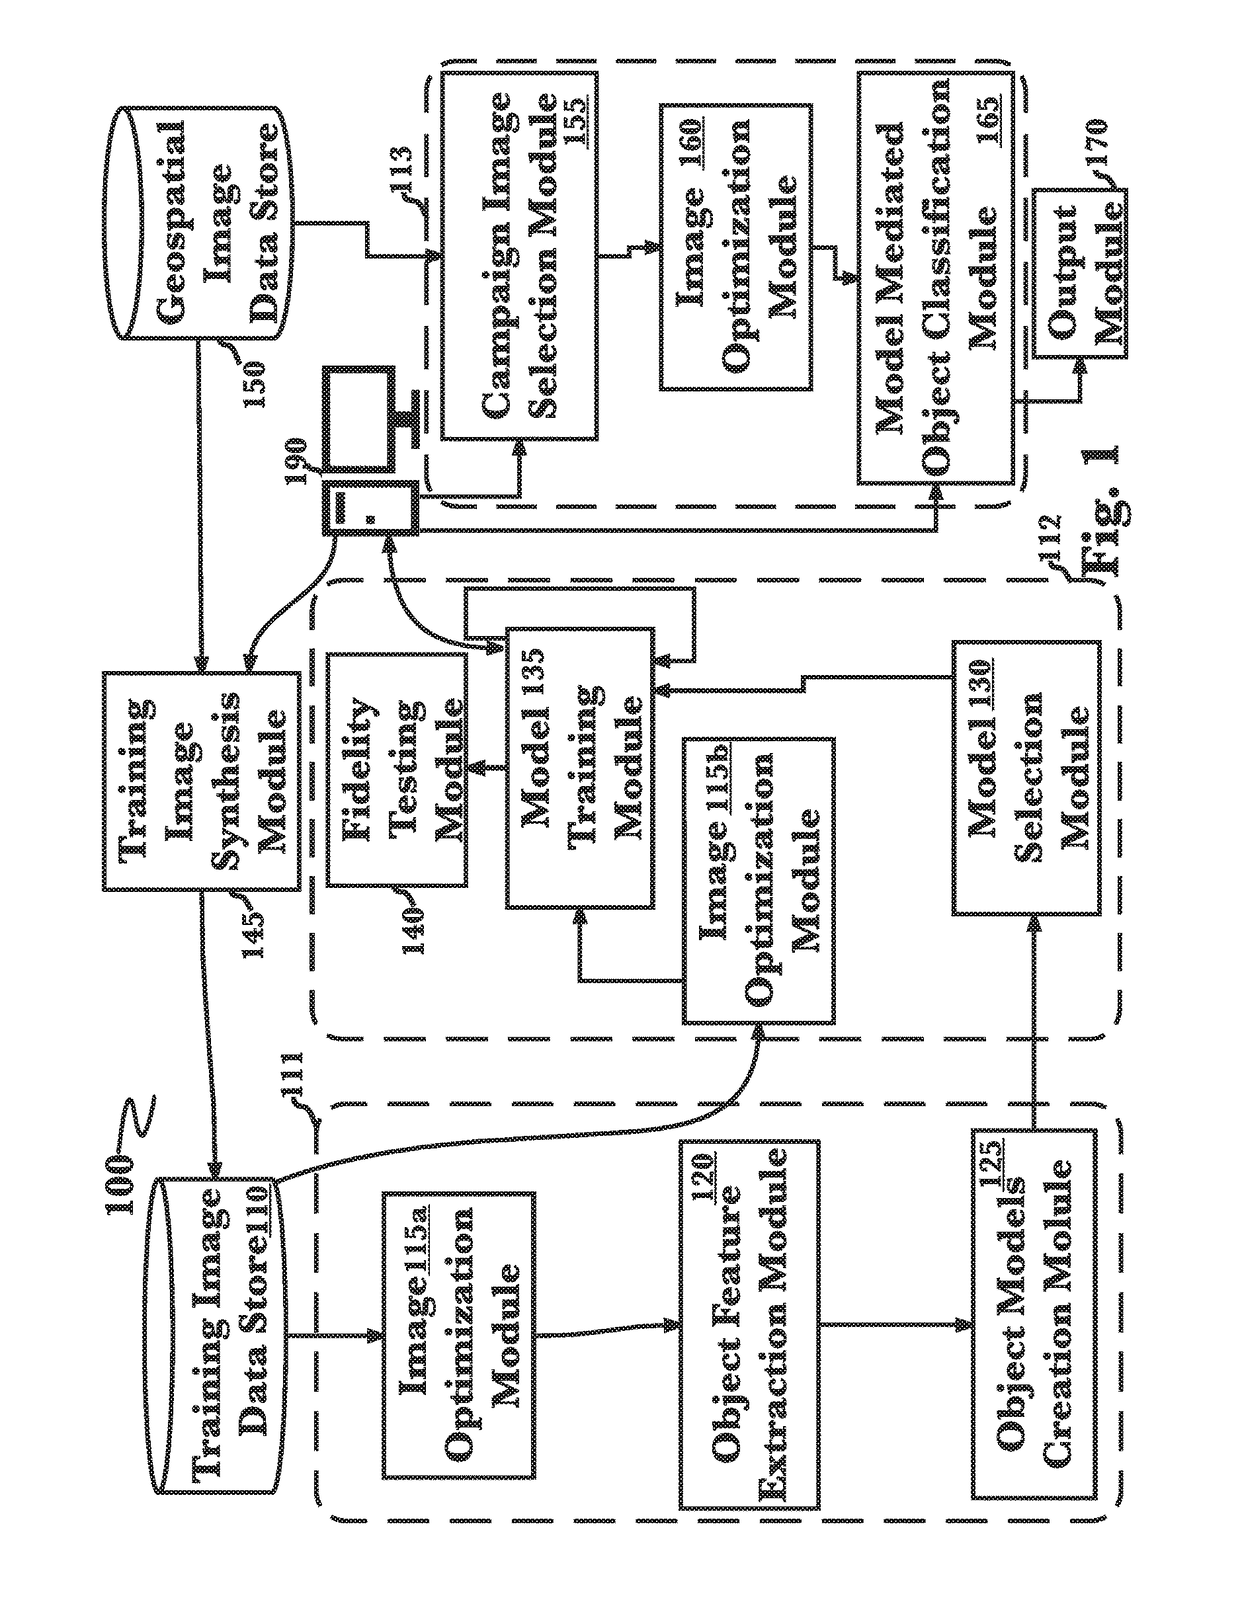 System for simplified generation of systems for broad area geospatial object detection